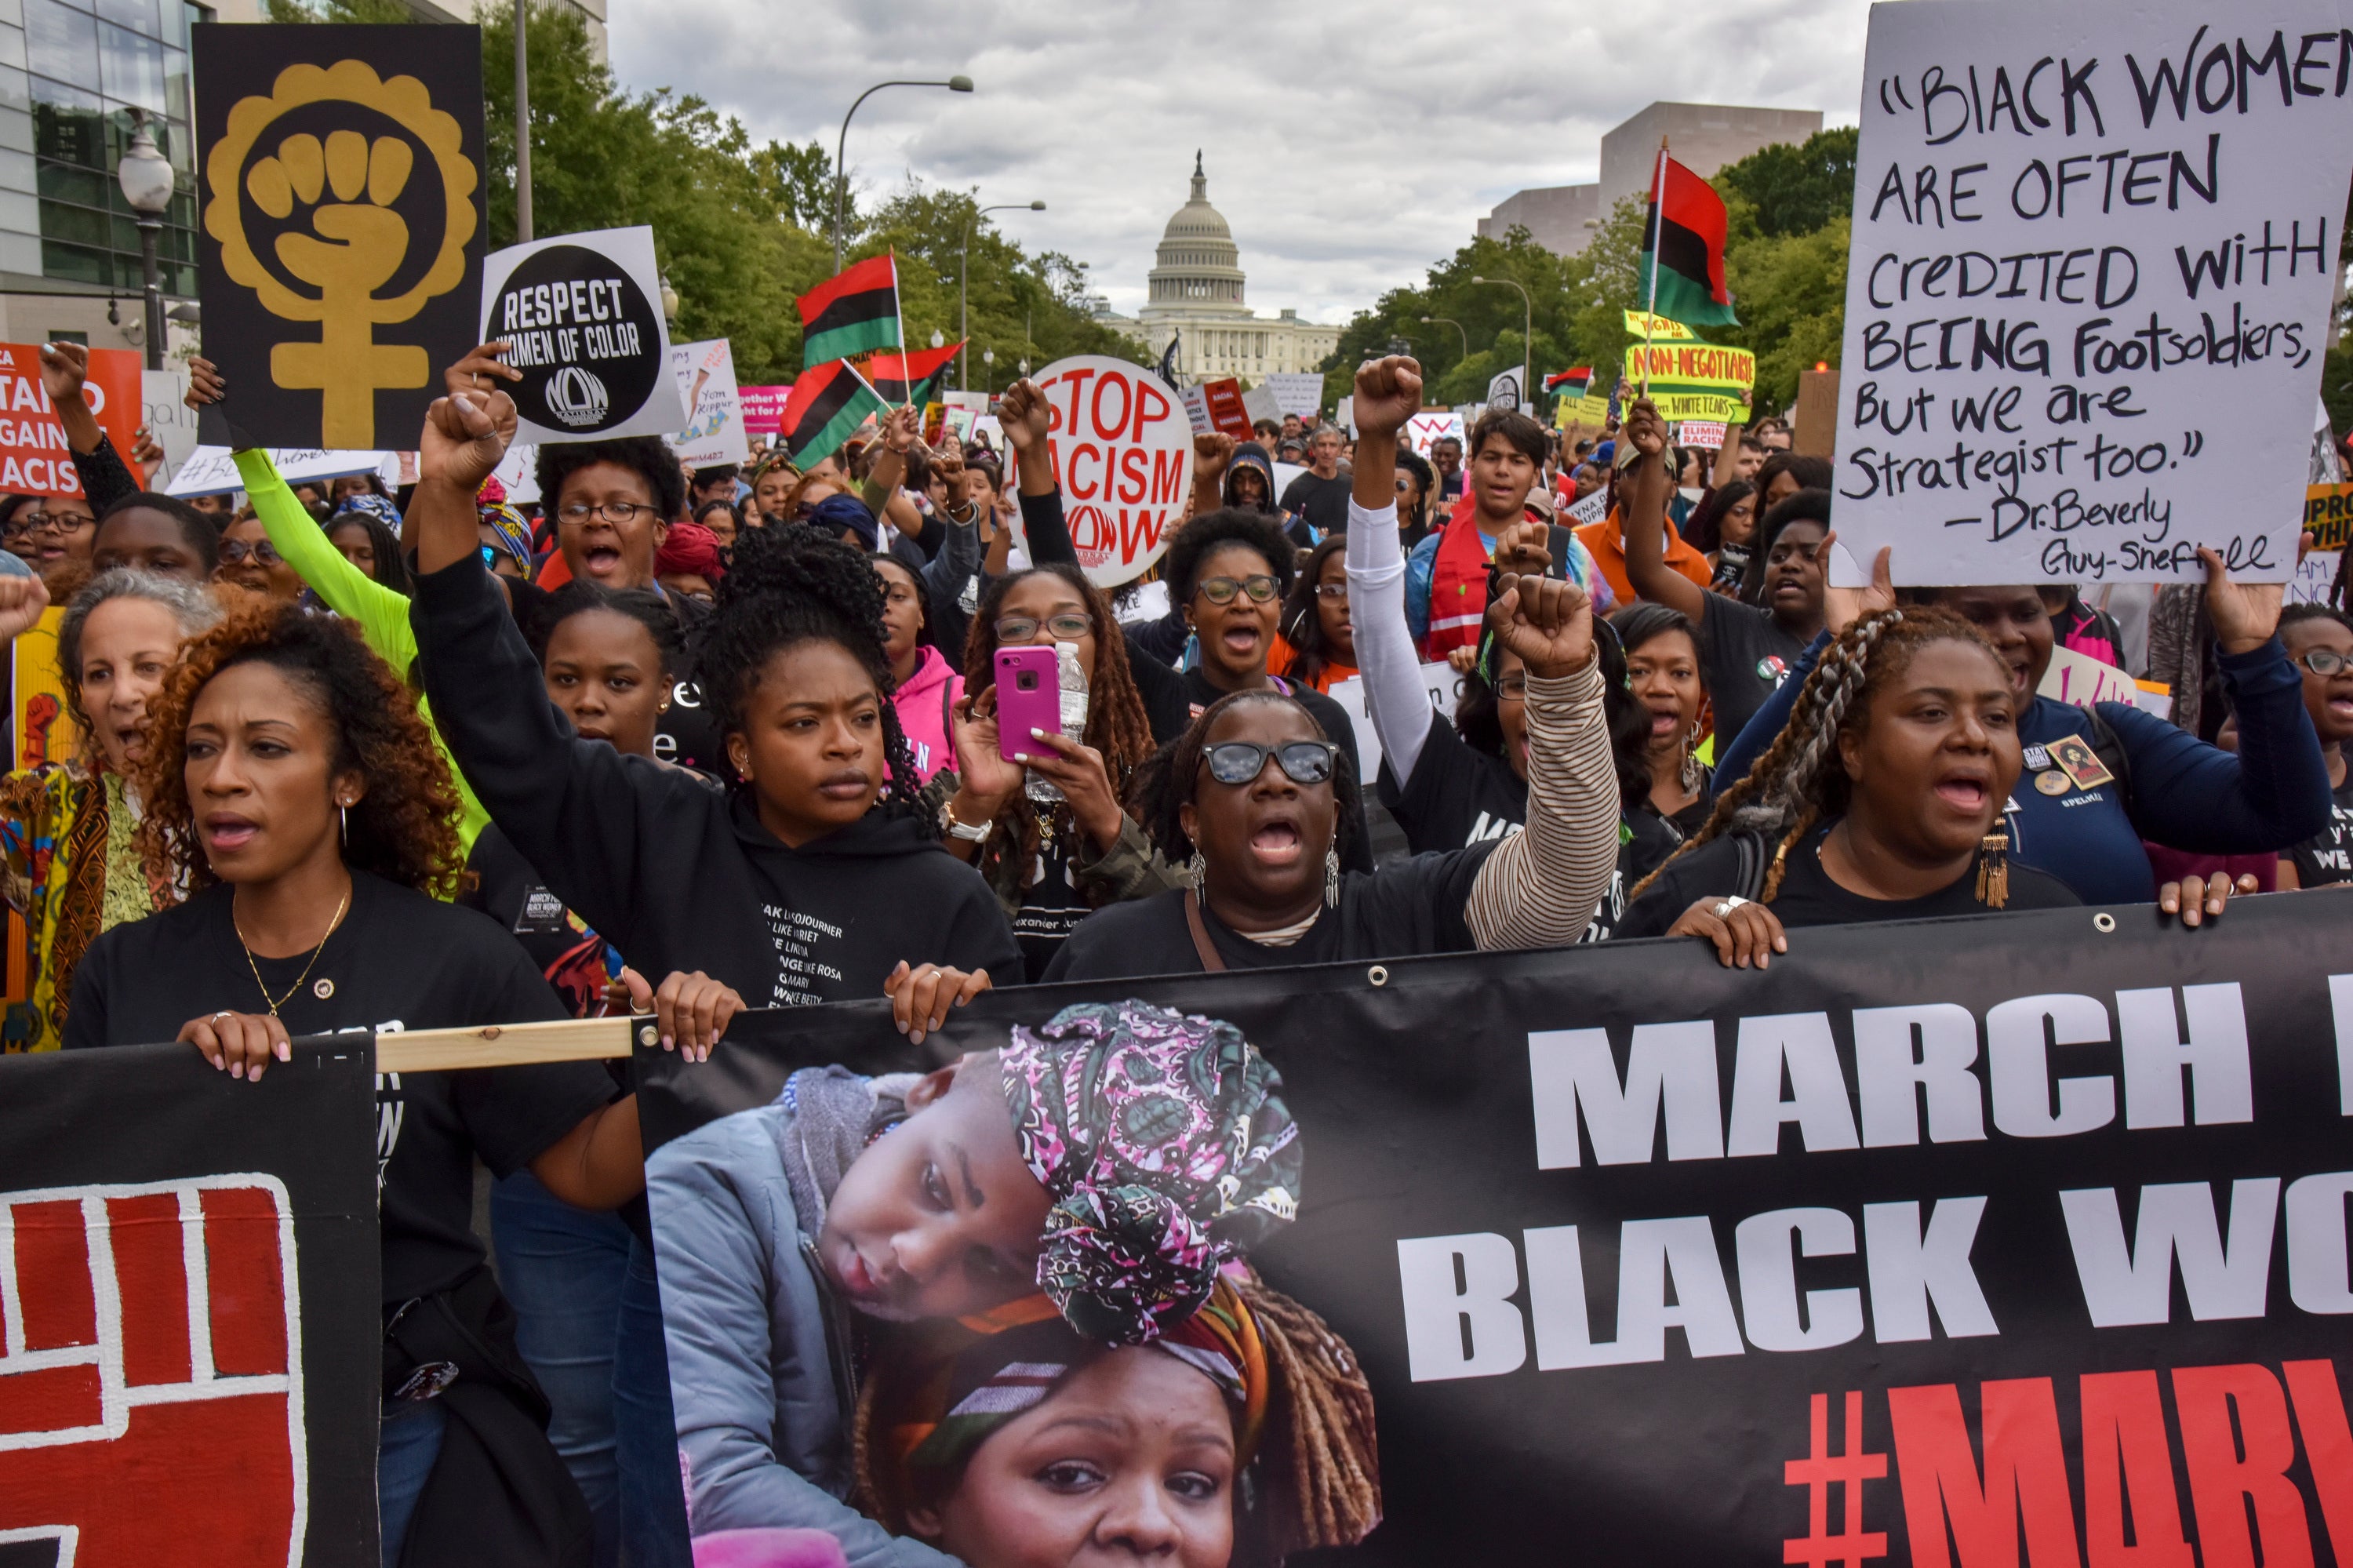 'It’s Our Turn': The March For Black Women Placed Our Issues Front And Center
